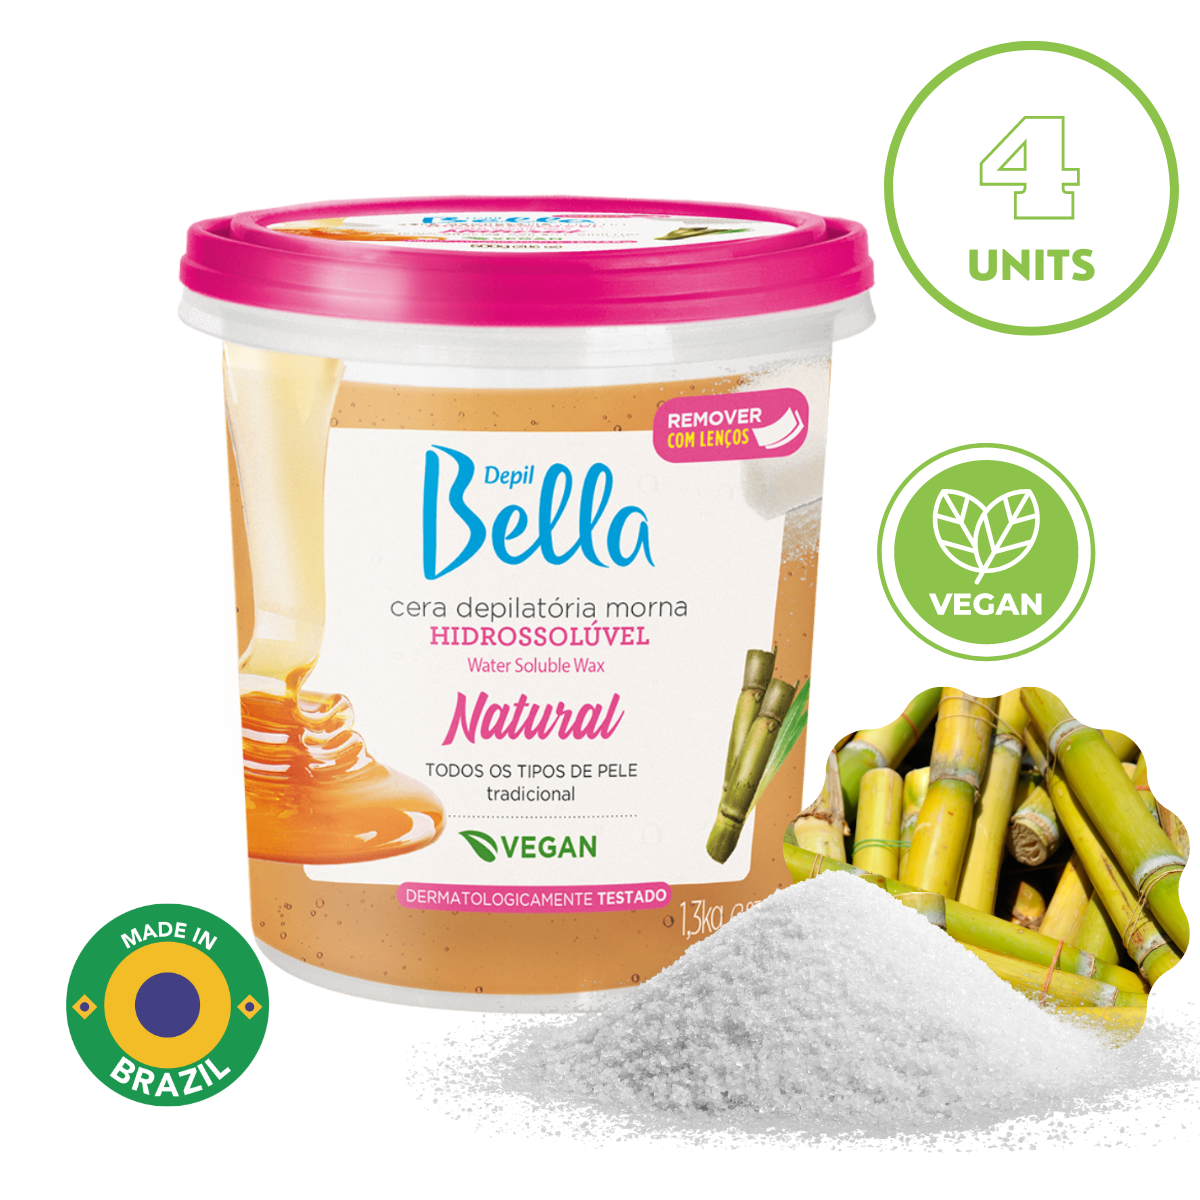 Depil Bella Full Body Sugar Wax, Natural Hair Remover, 1300g - Easy, Gentle & Effective (4 Units Offer)